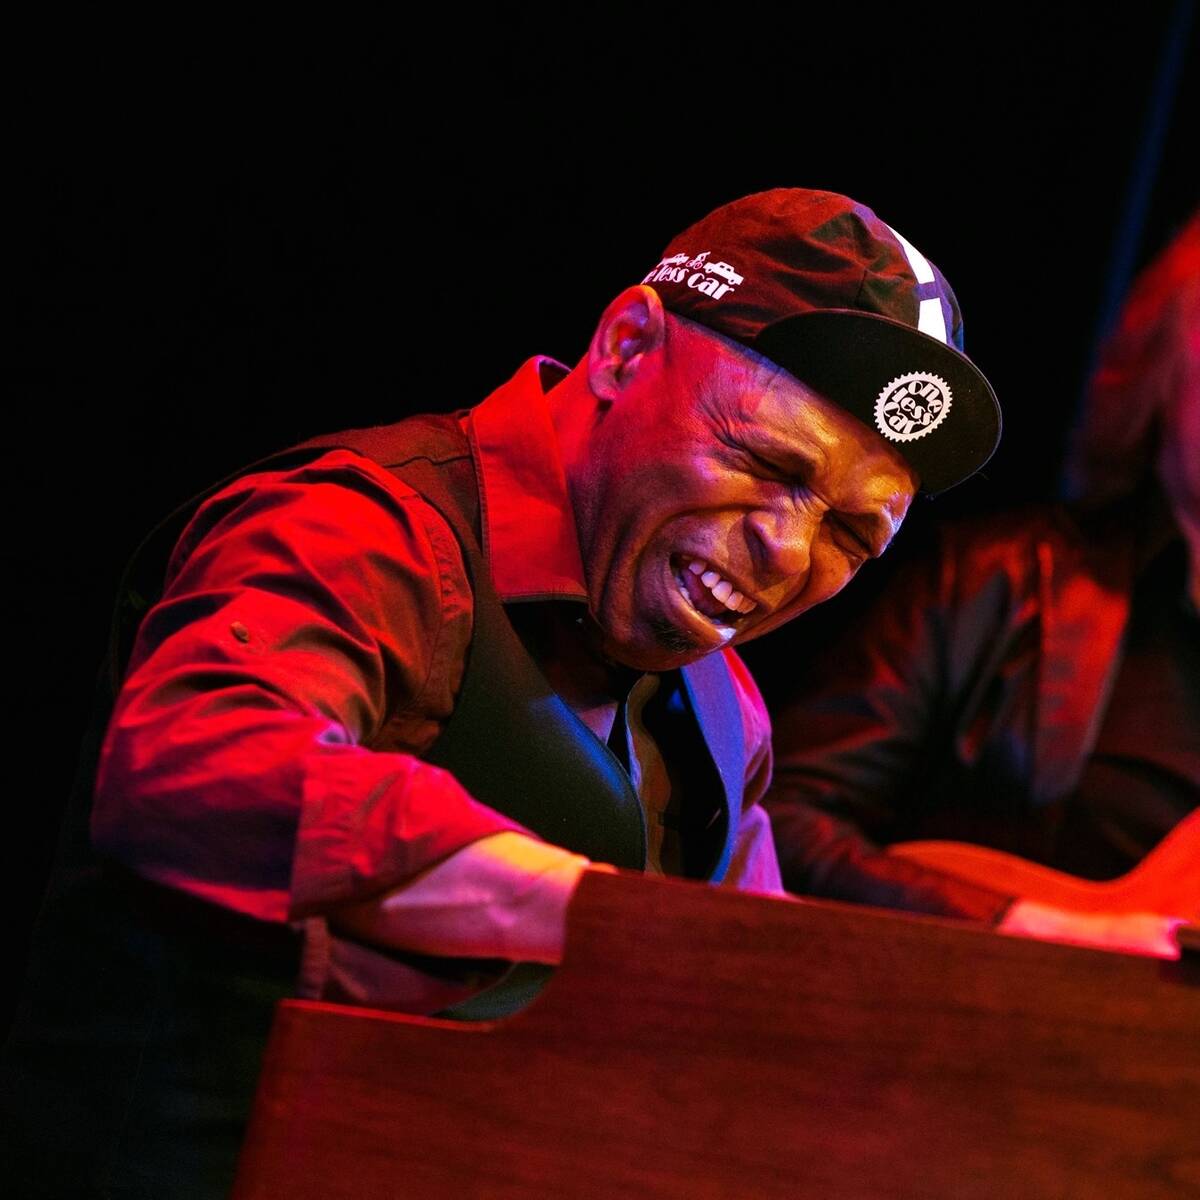 The iconic label Blue Note Records has re-released Foster’s debut album, “Two Headed Freap, ...